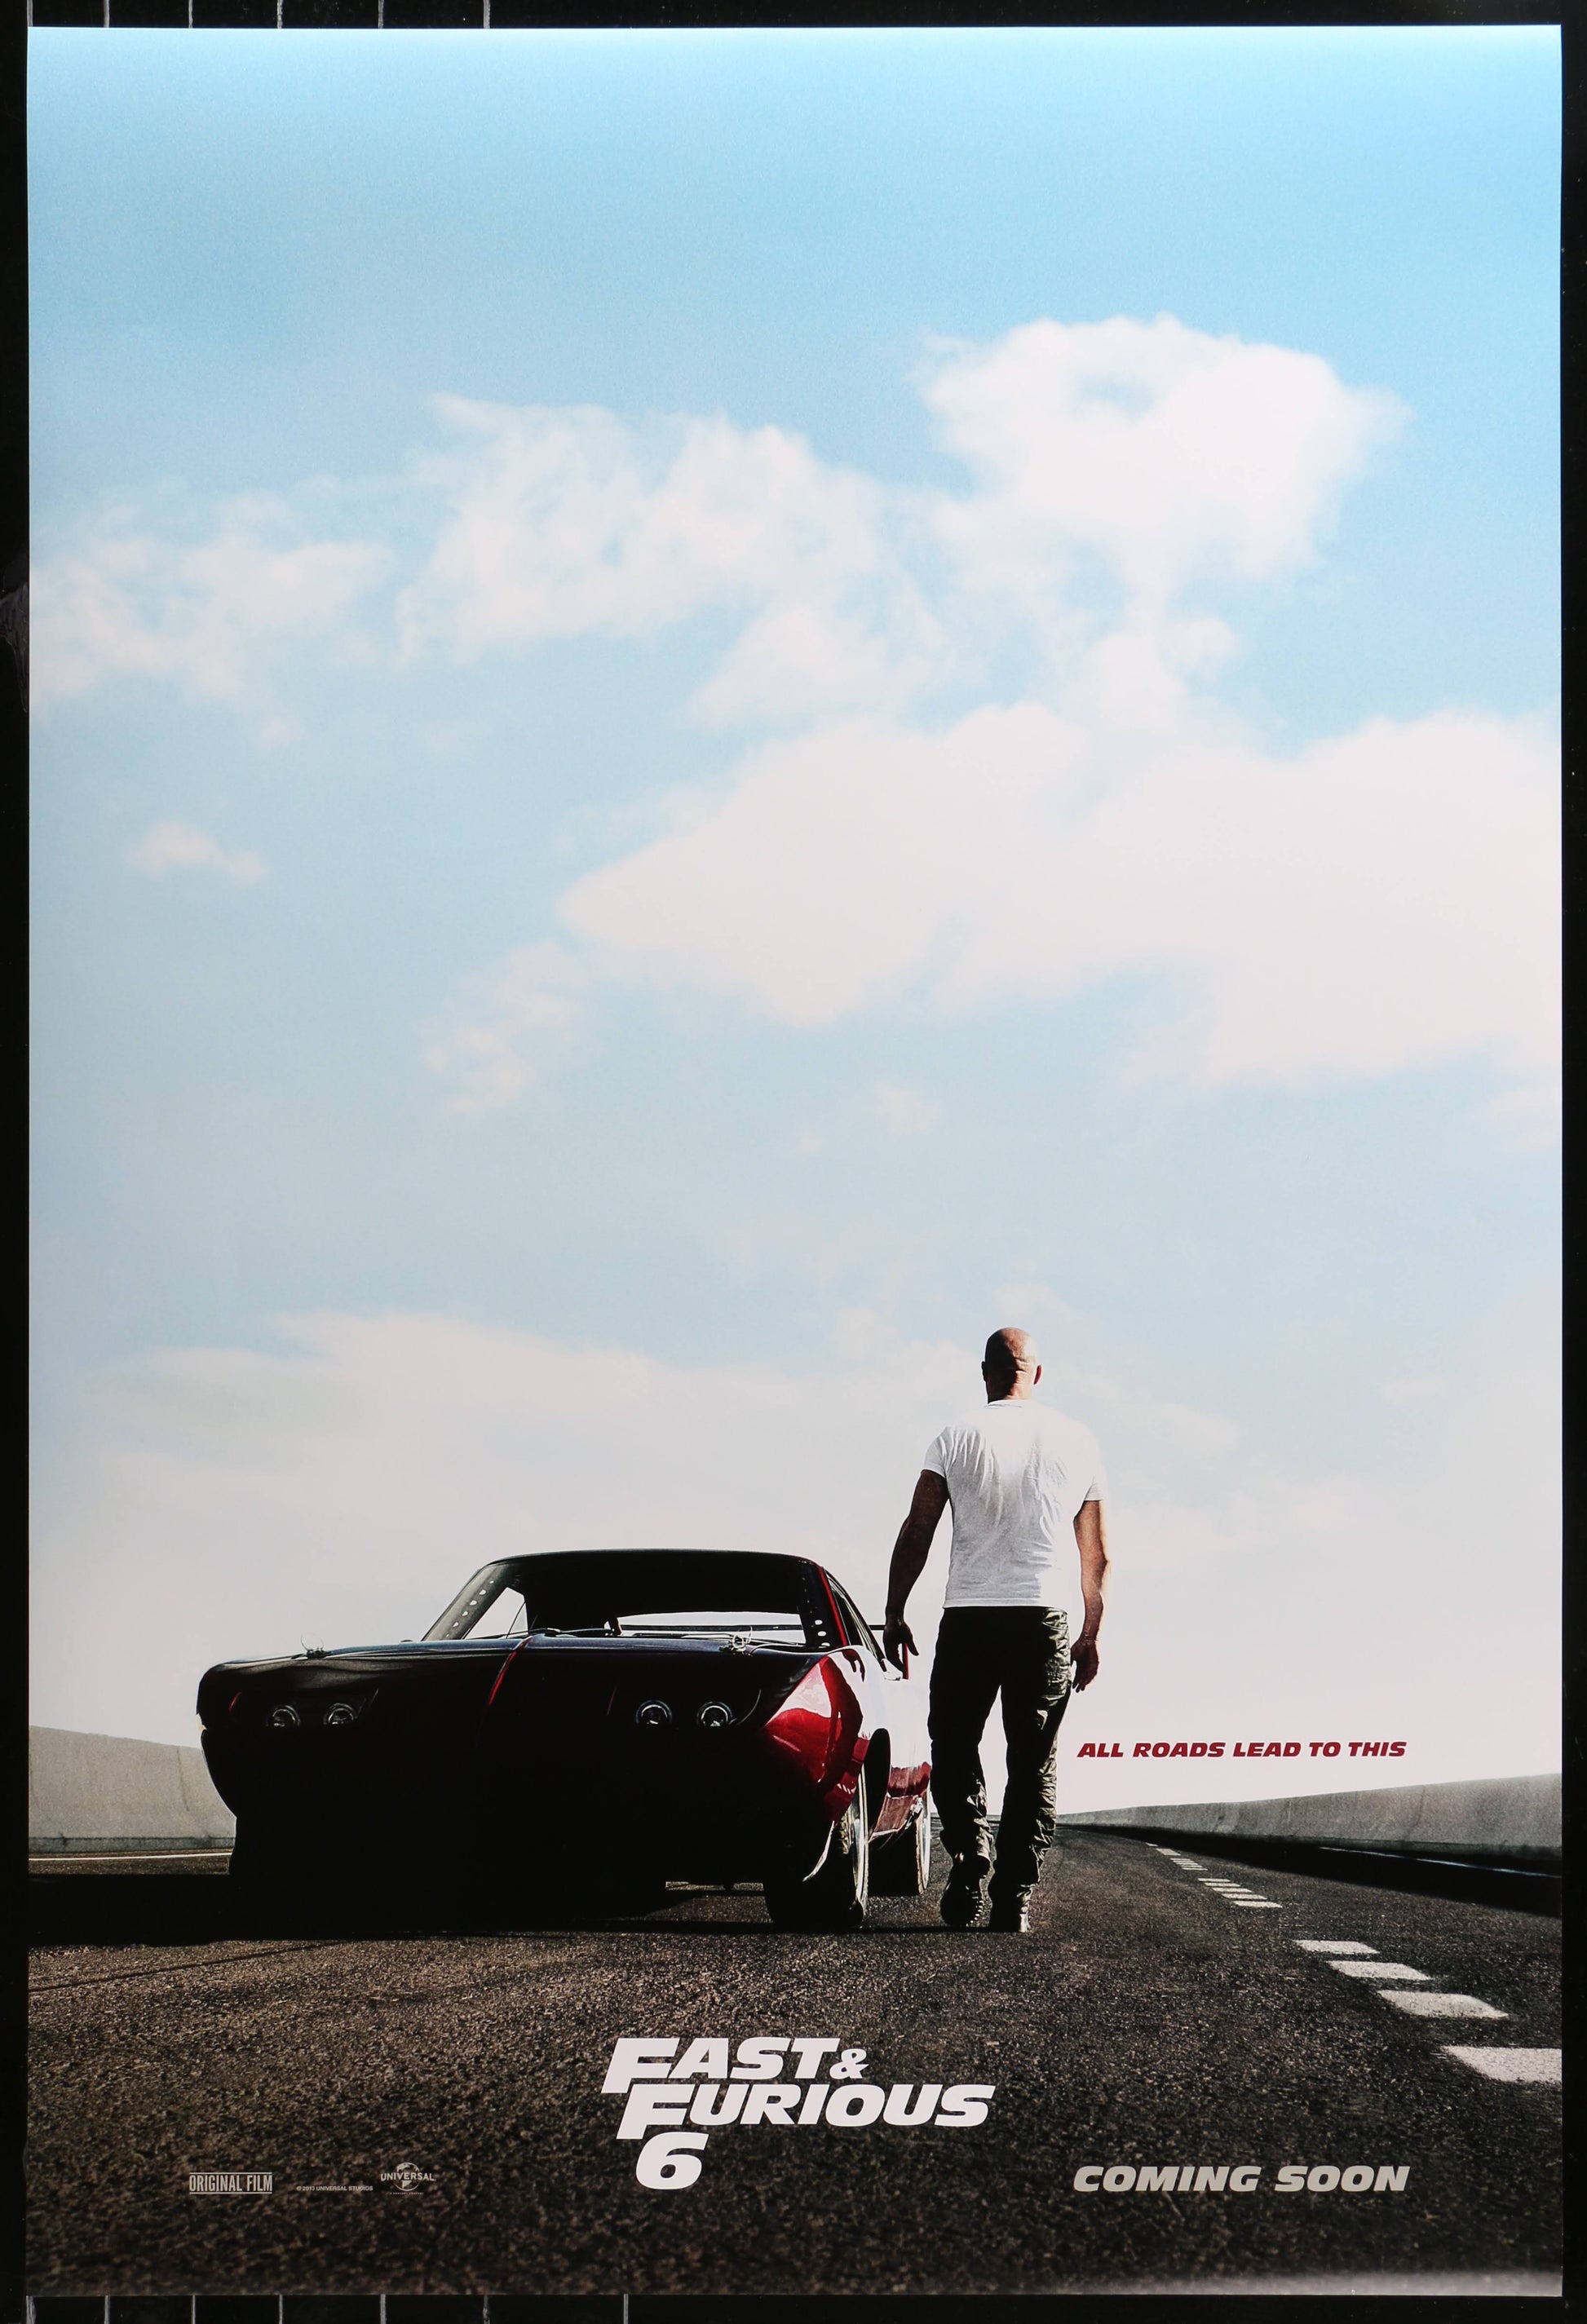 Fast & Furious 6 US One Sheet Teaser Diesel Style. (2013) - ORIGINAL RELEASE - posterpalace.com